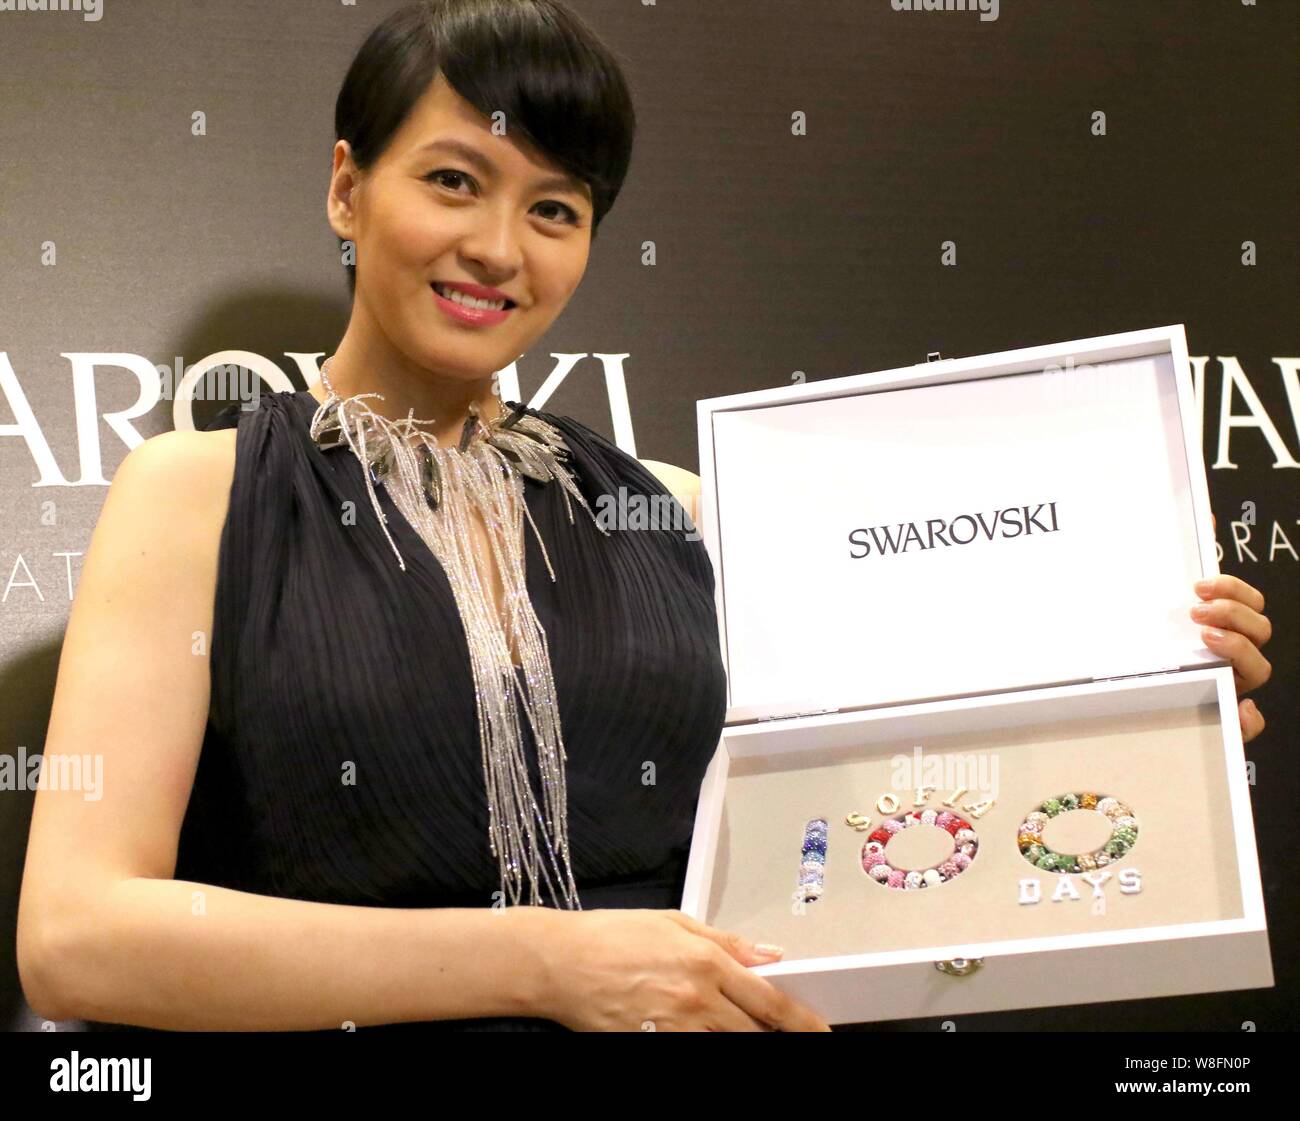 Hong Kong singer Gigi Leung poses during a promotional event for Swarovski in Shanghai, China, 11 June 2015. Stock Photo